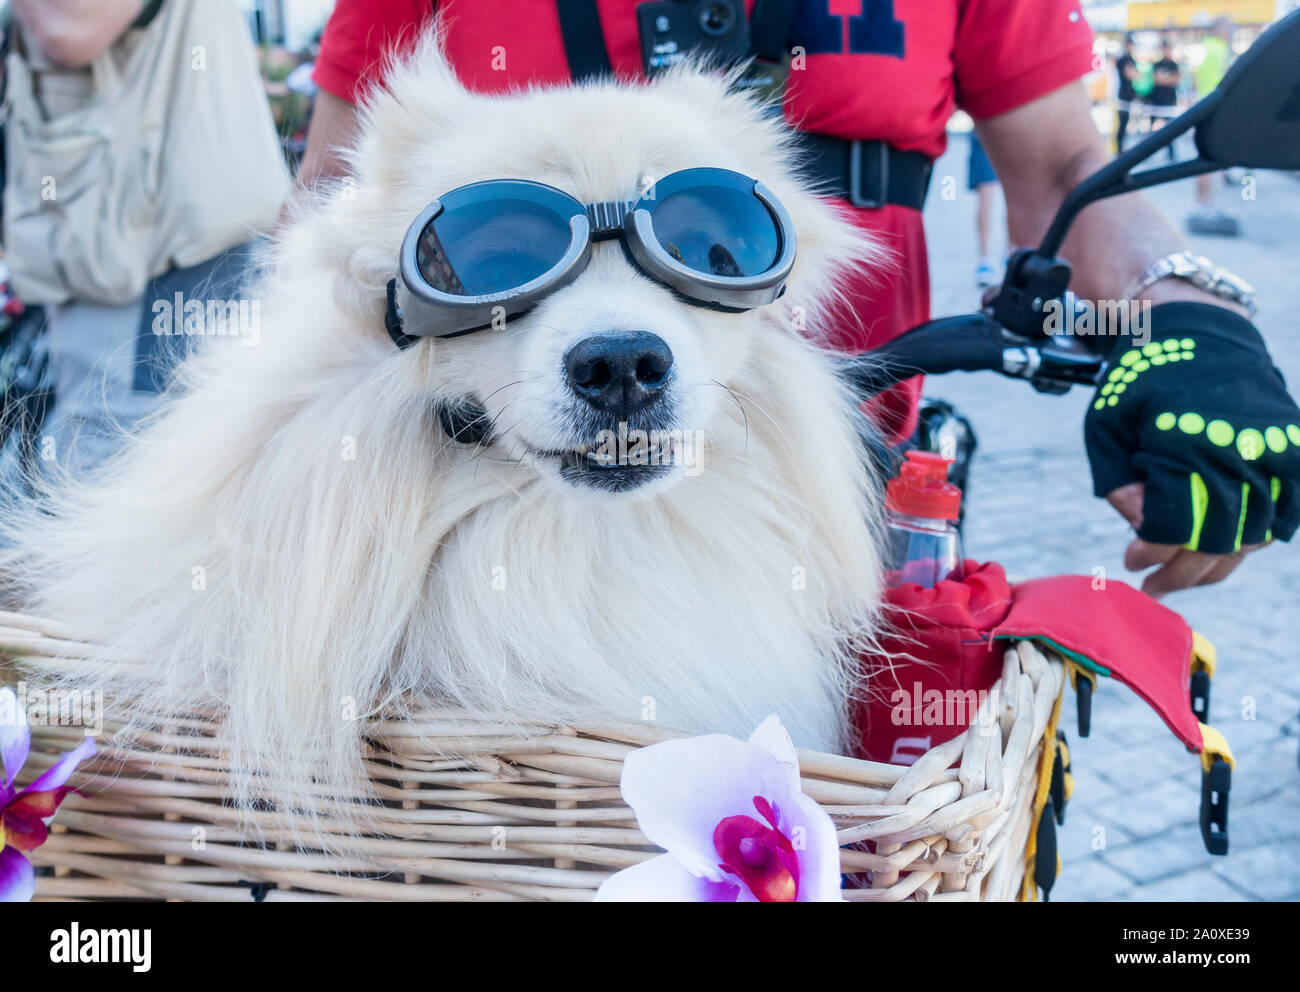 Pomeranian dog wearing sunglasses/goggles, riding in basket on front of bicycle. Stock Photo